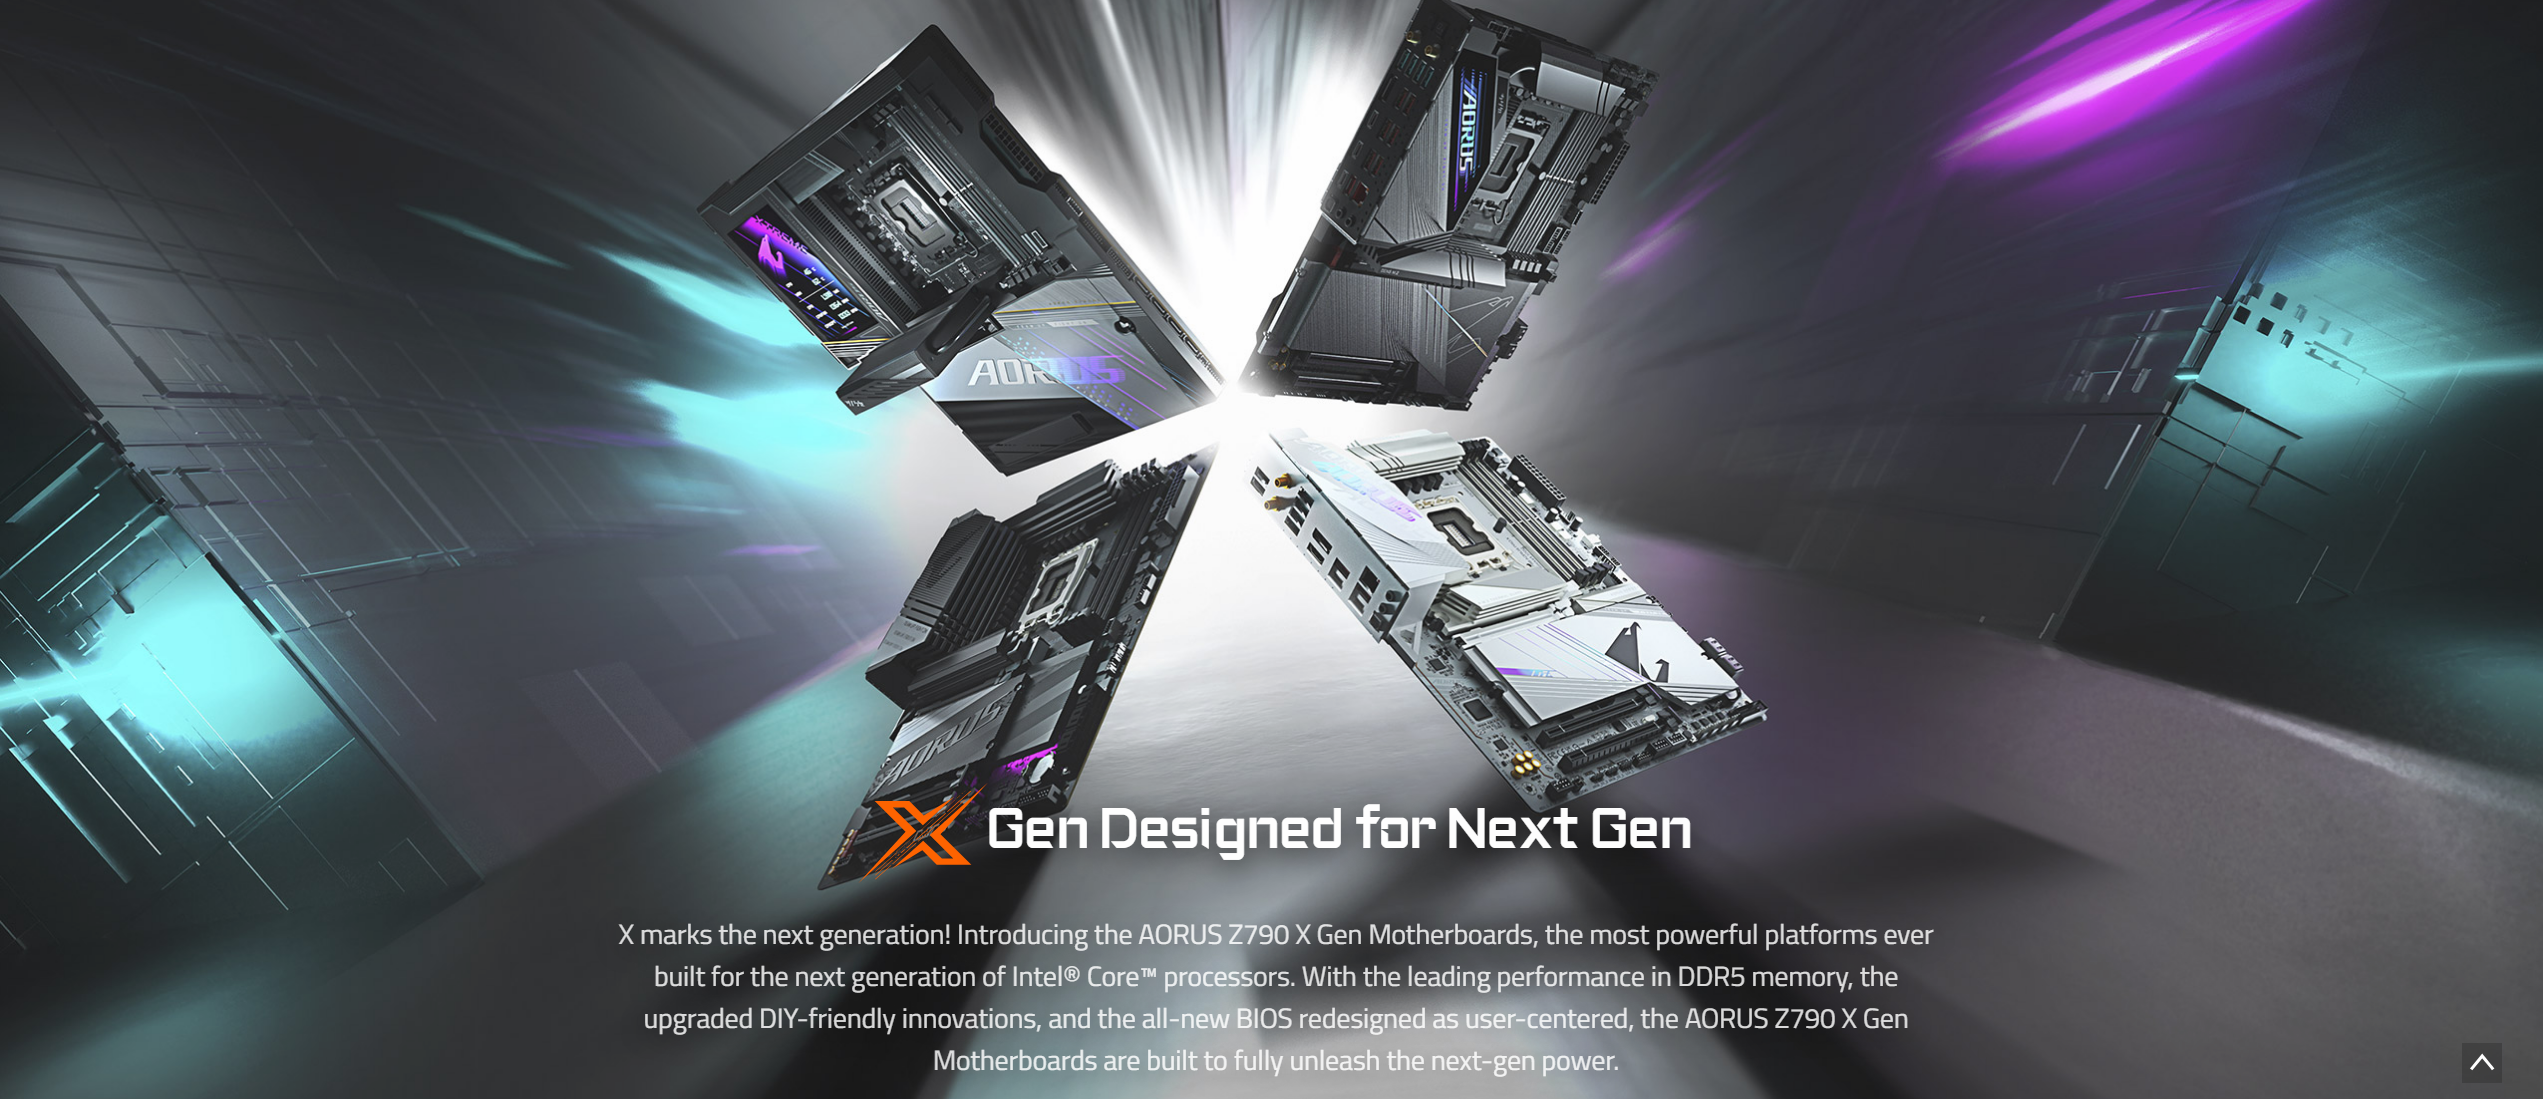 A large marketing image providing additional information about the product Gigabyte Z790 Aorus Pro X LGA1700 ATX Desktop Motherboard - Additional alt info not provided